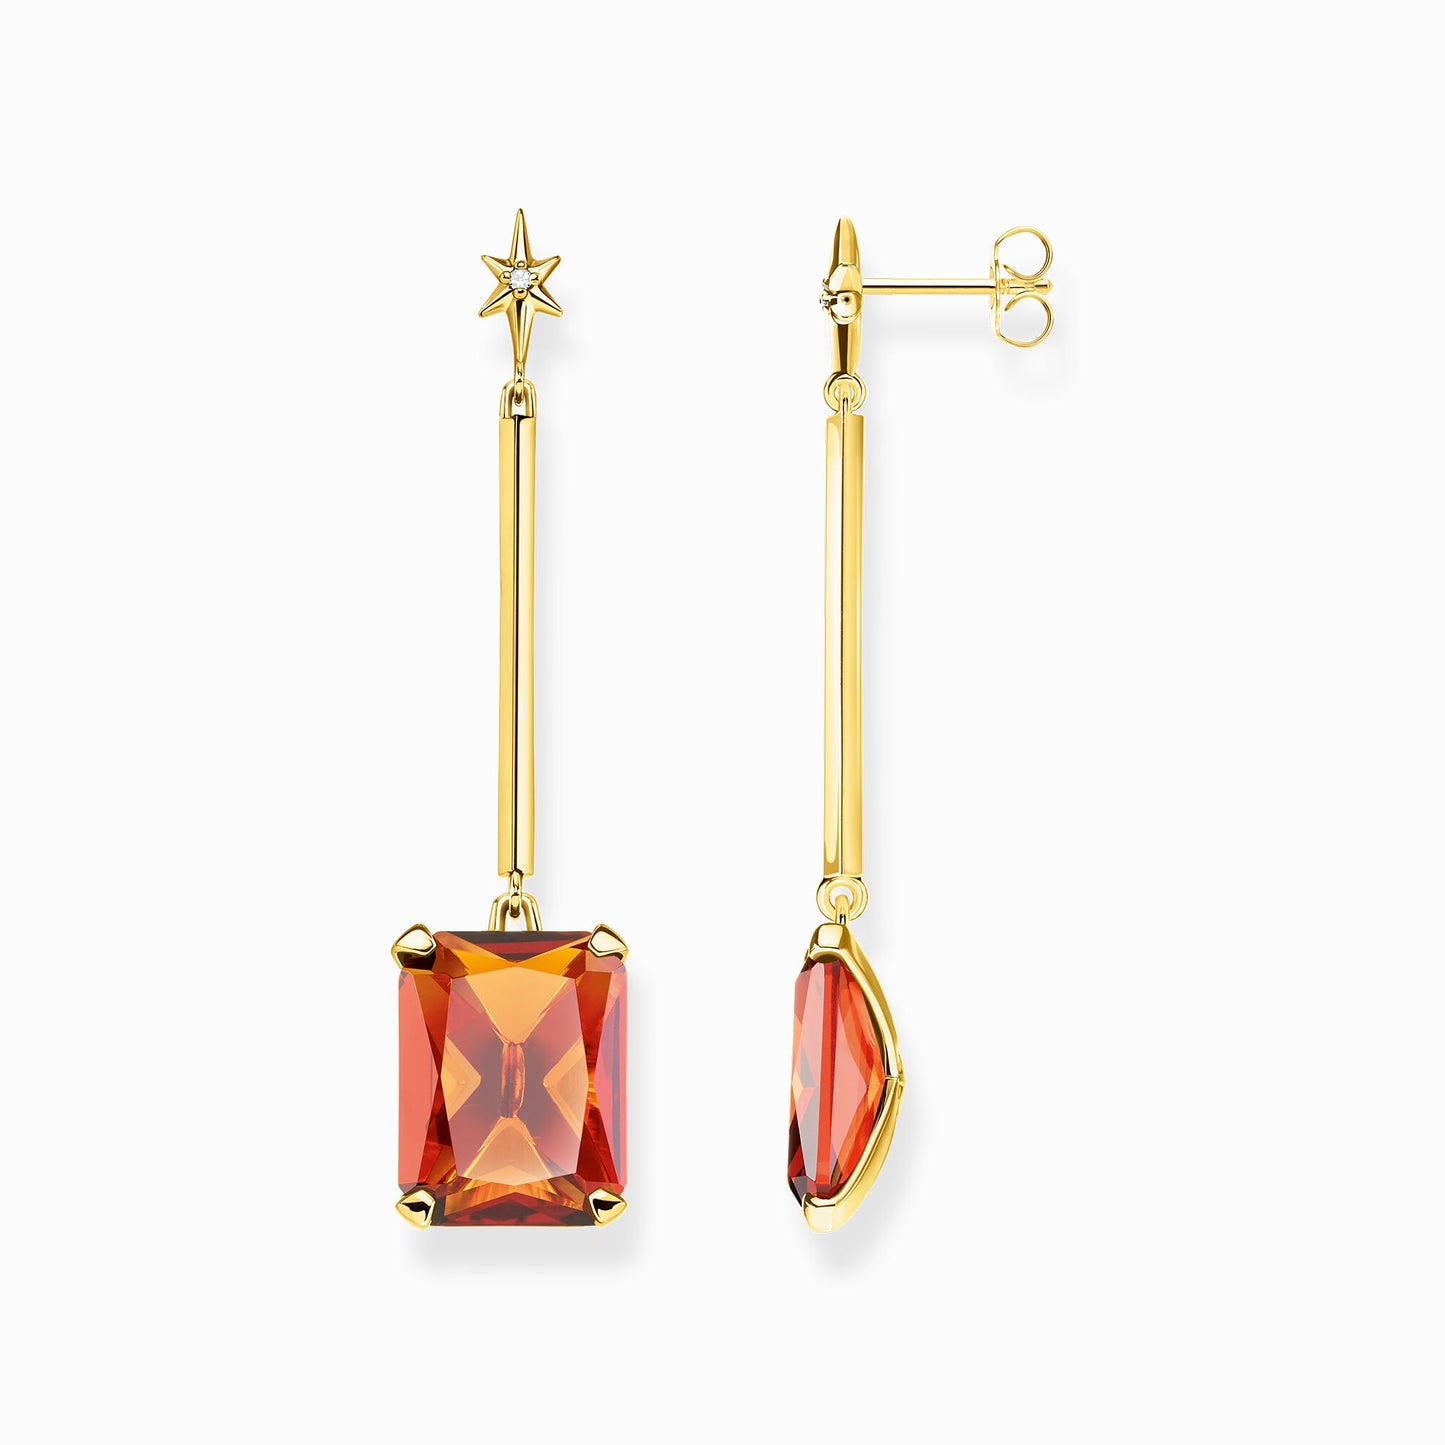 Thomas Sabo Earrings with orange stone and star gold plated